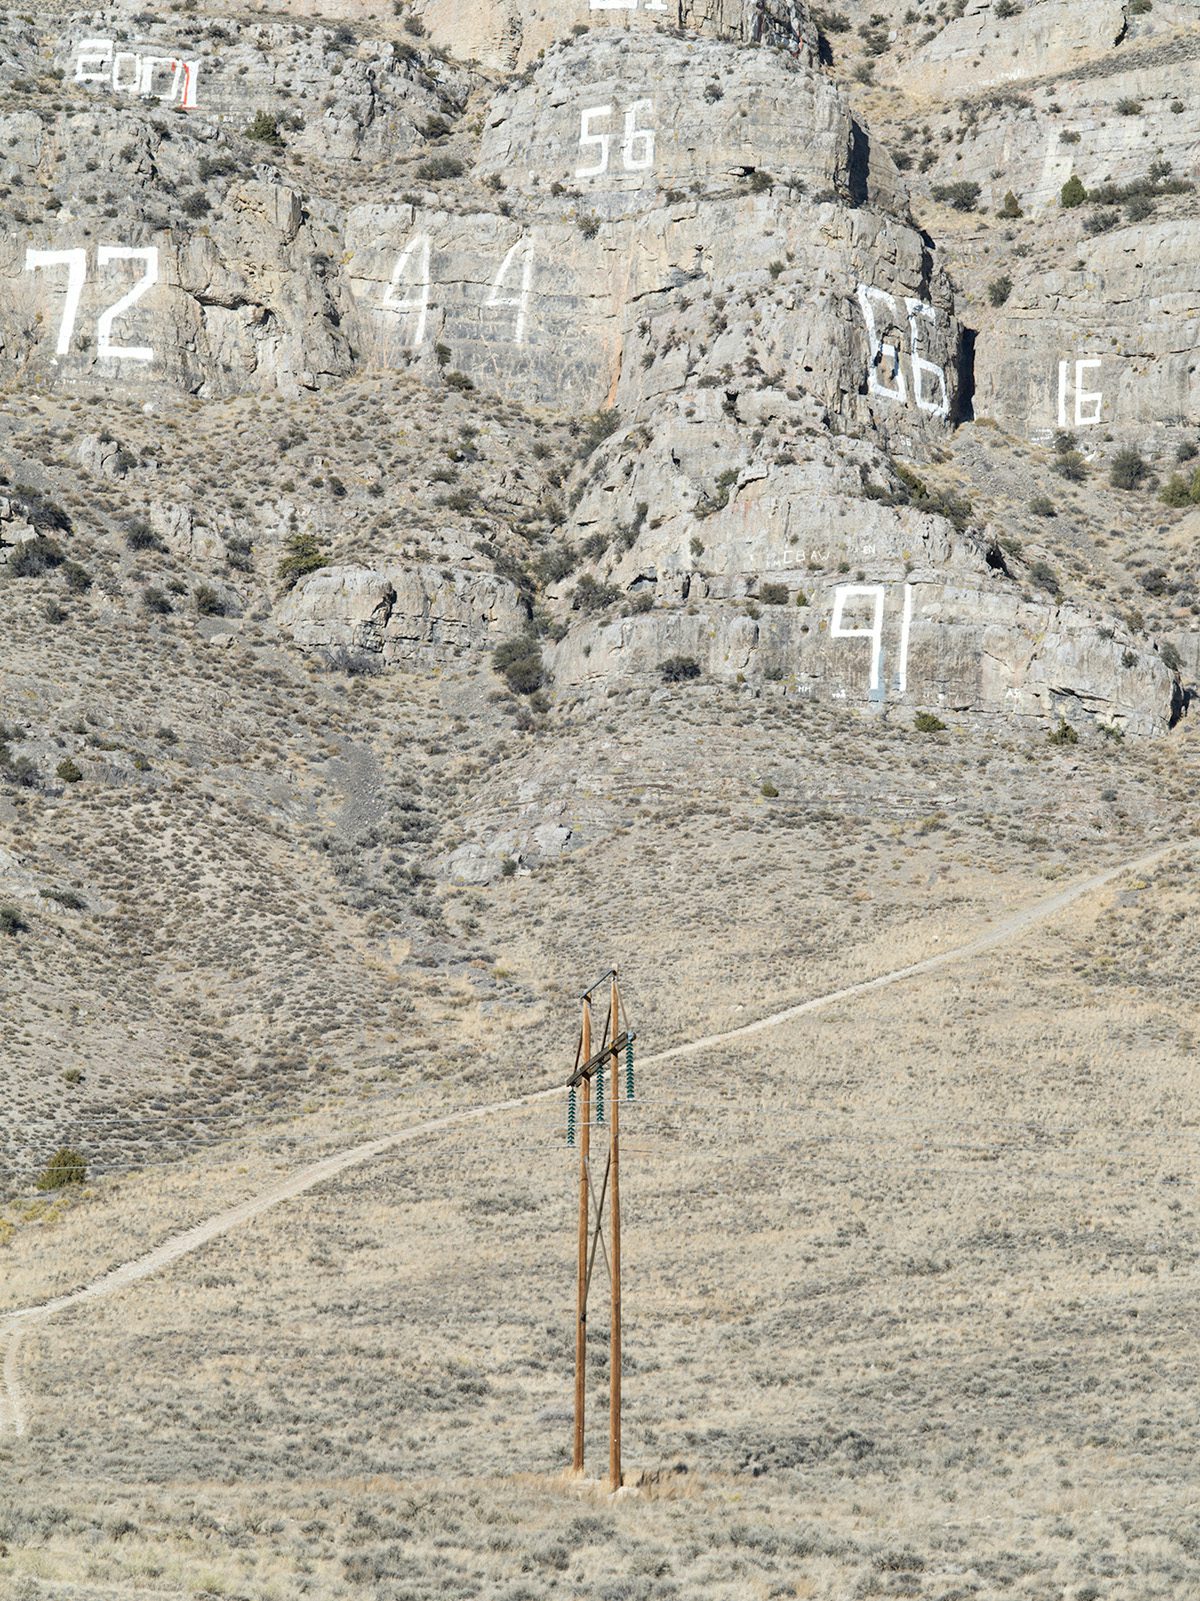 Image from American Glitch by Andrea Orejarena and Caleb Stein showing pilons surrounded by a dry rocky landscape